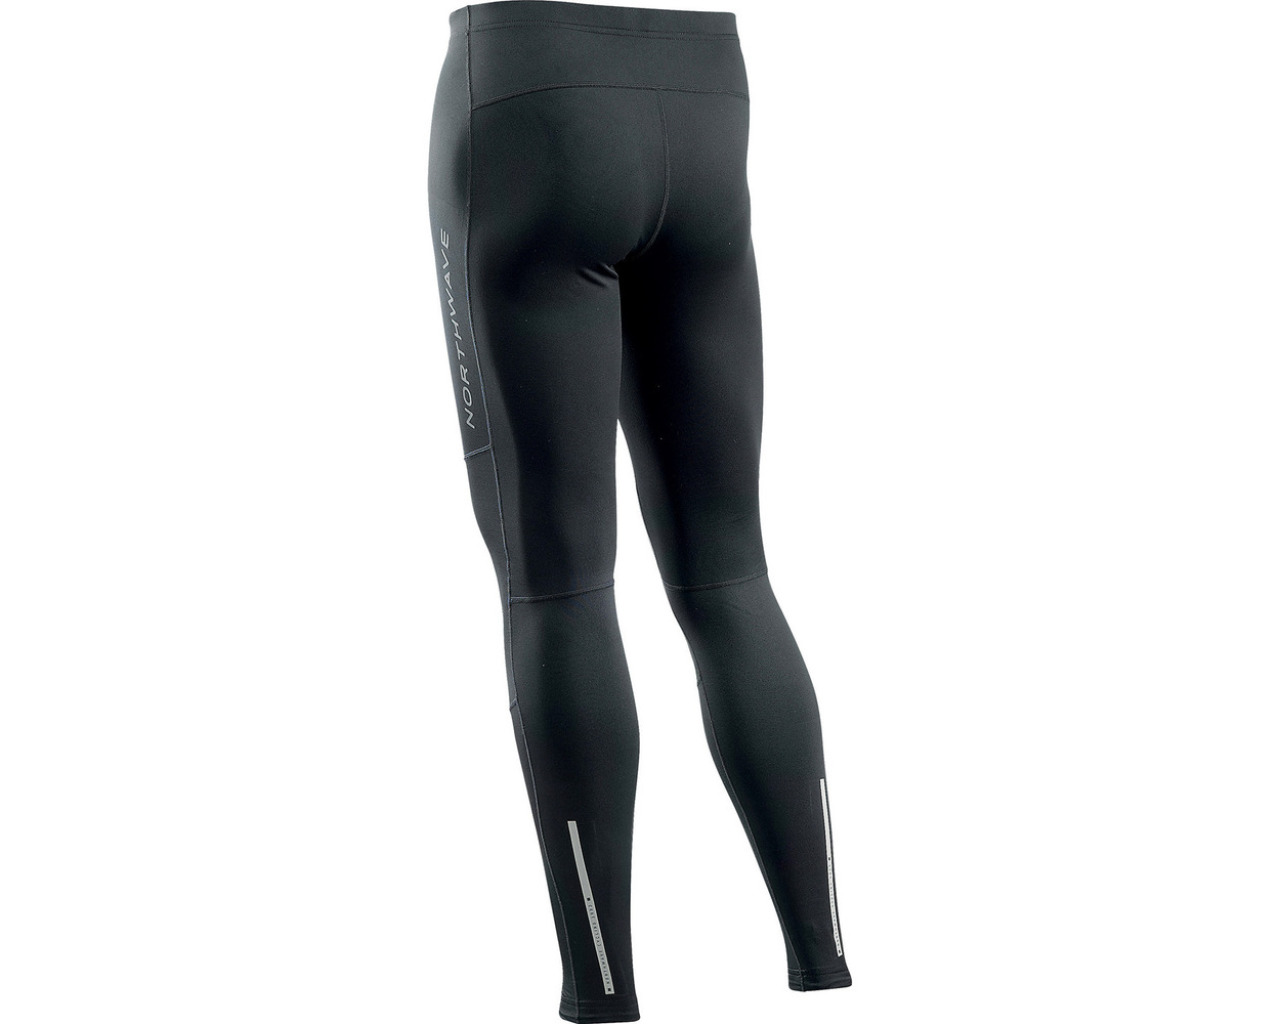 Northwave Force 2 Tights | Merlin Cycles